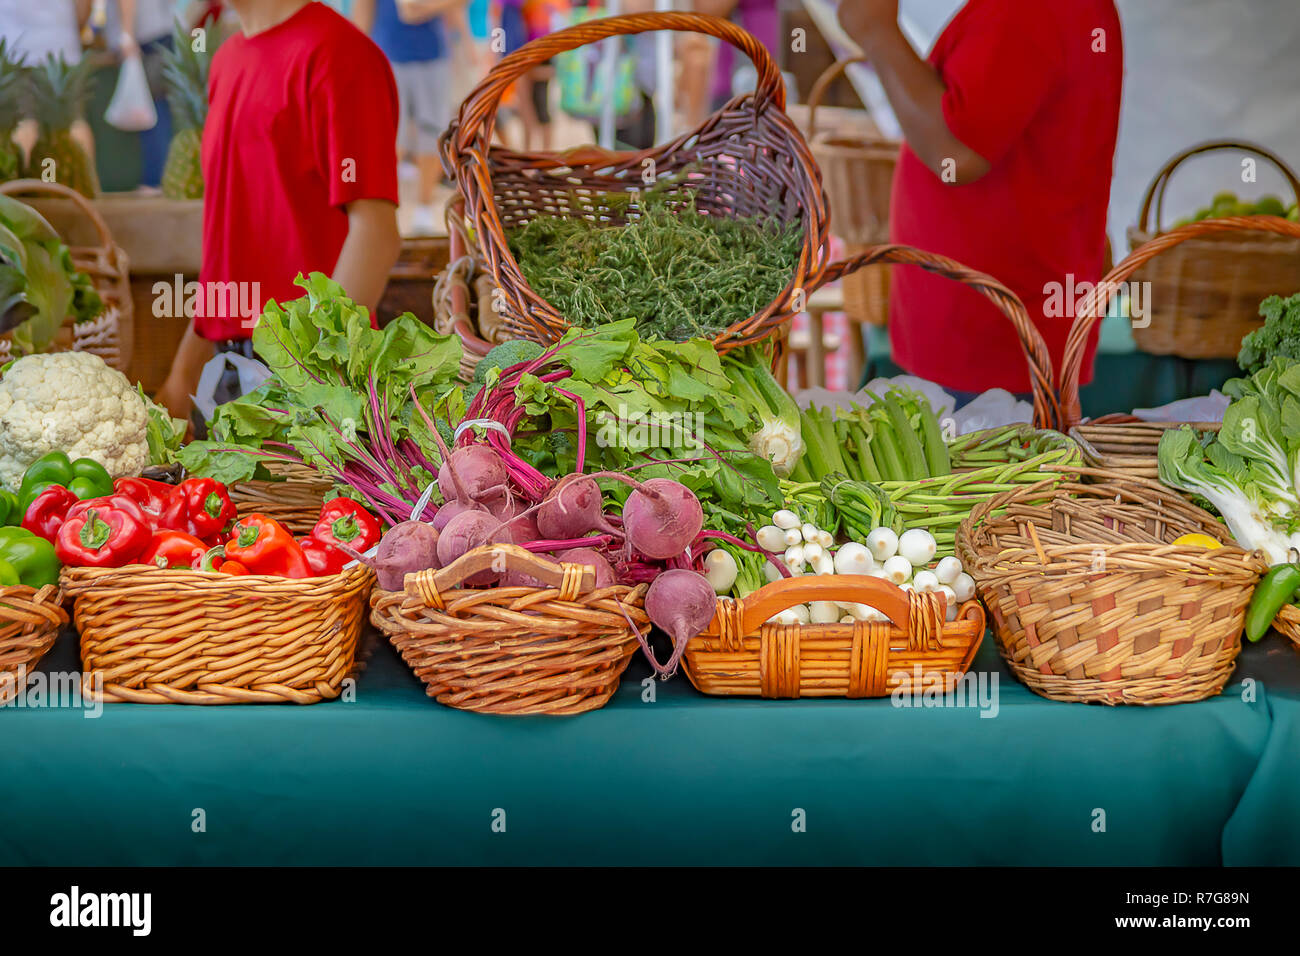 Beautifully detailed baskets filled with vibrant fresh vegetables at the local community farmers market. Stock Photo